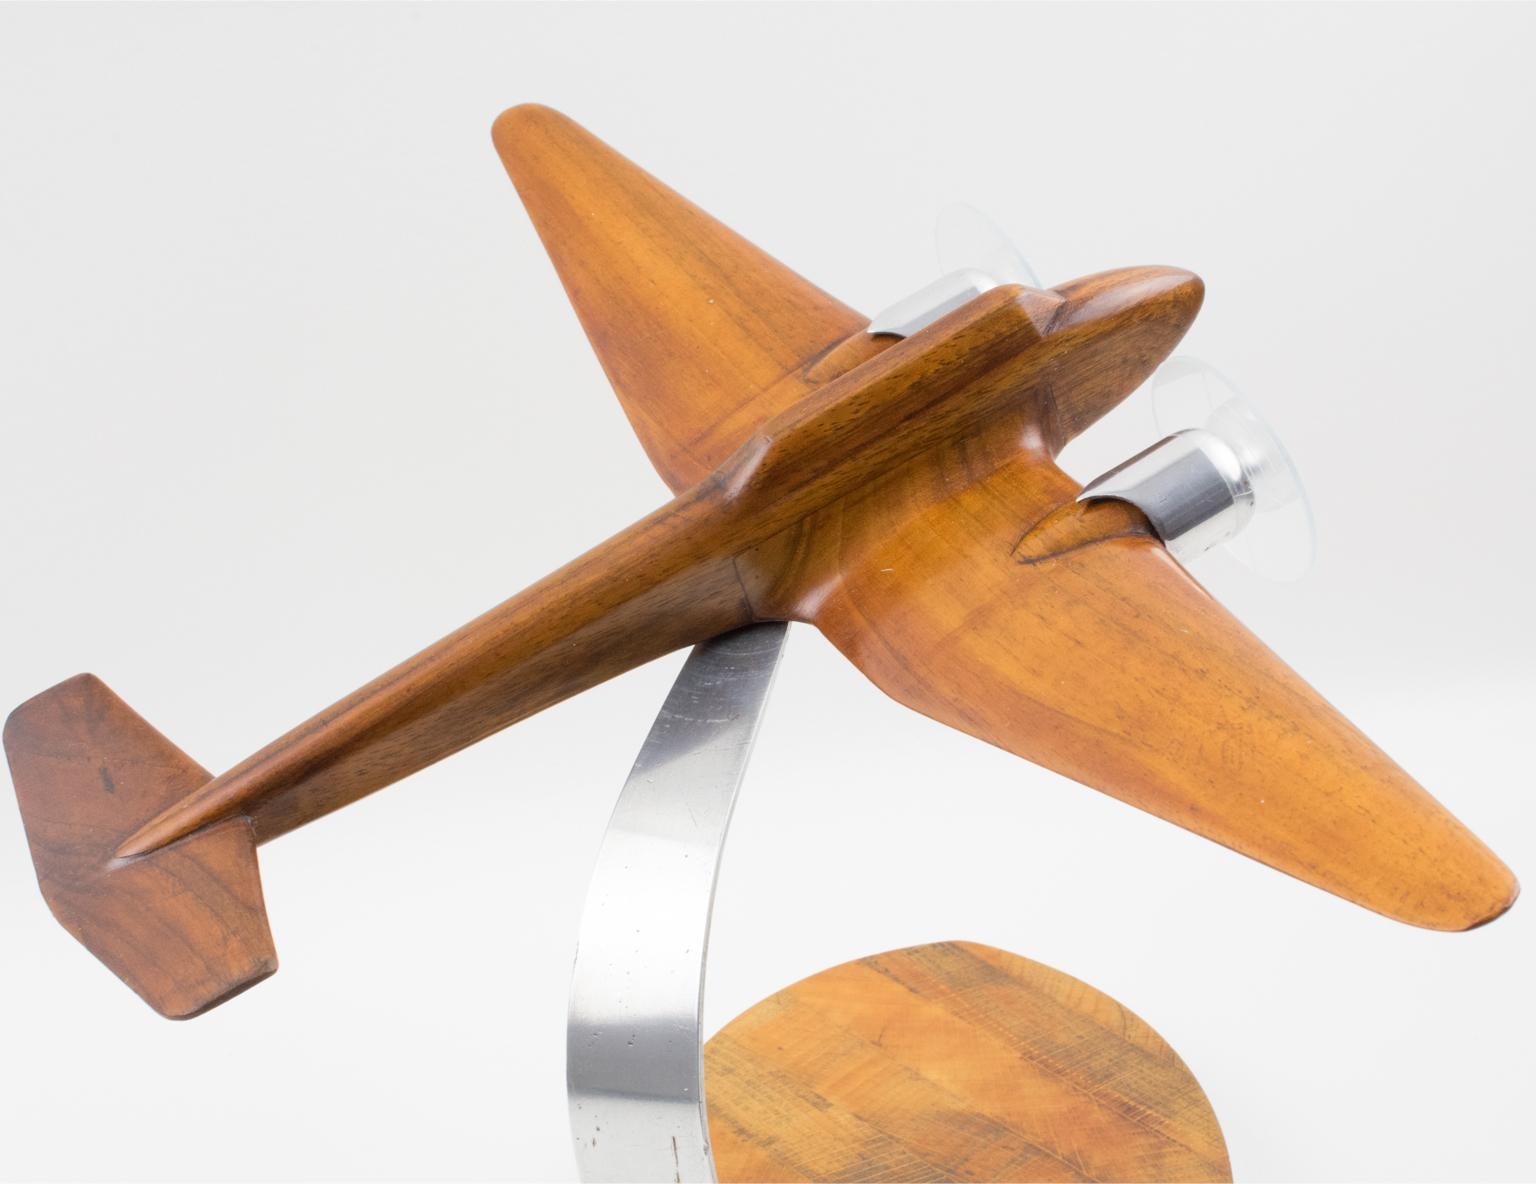 French Art Deco, 1940s Wooden and Aluminum Airplane Aviation Model 12